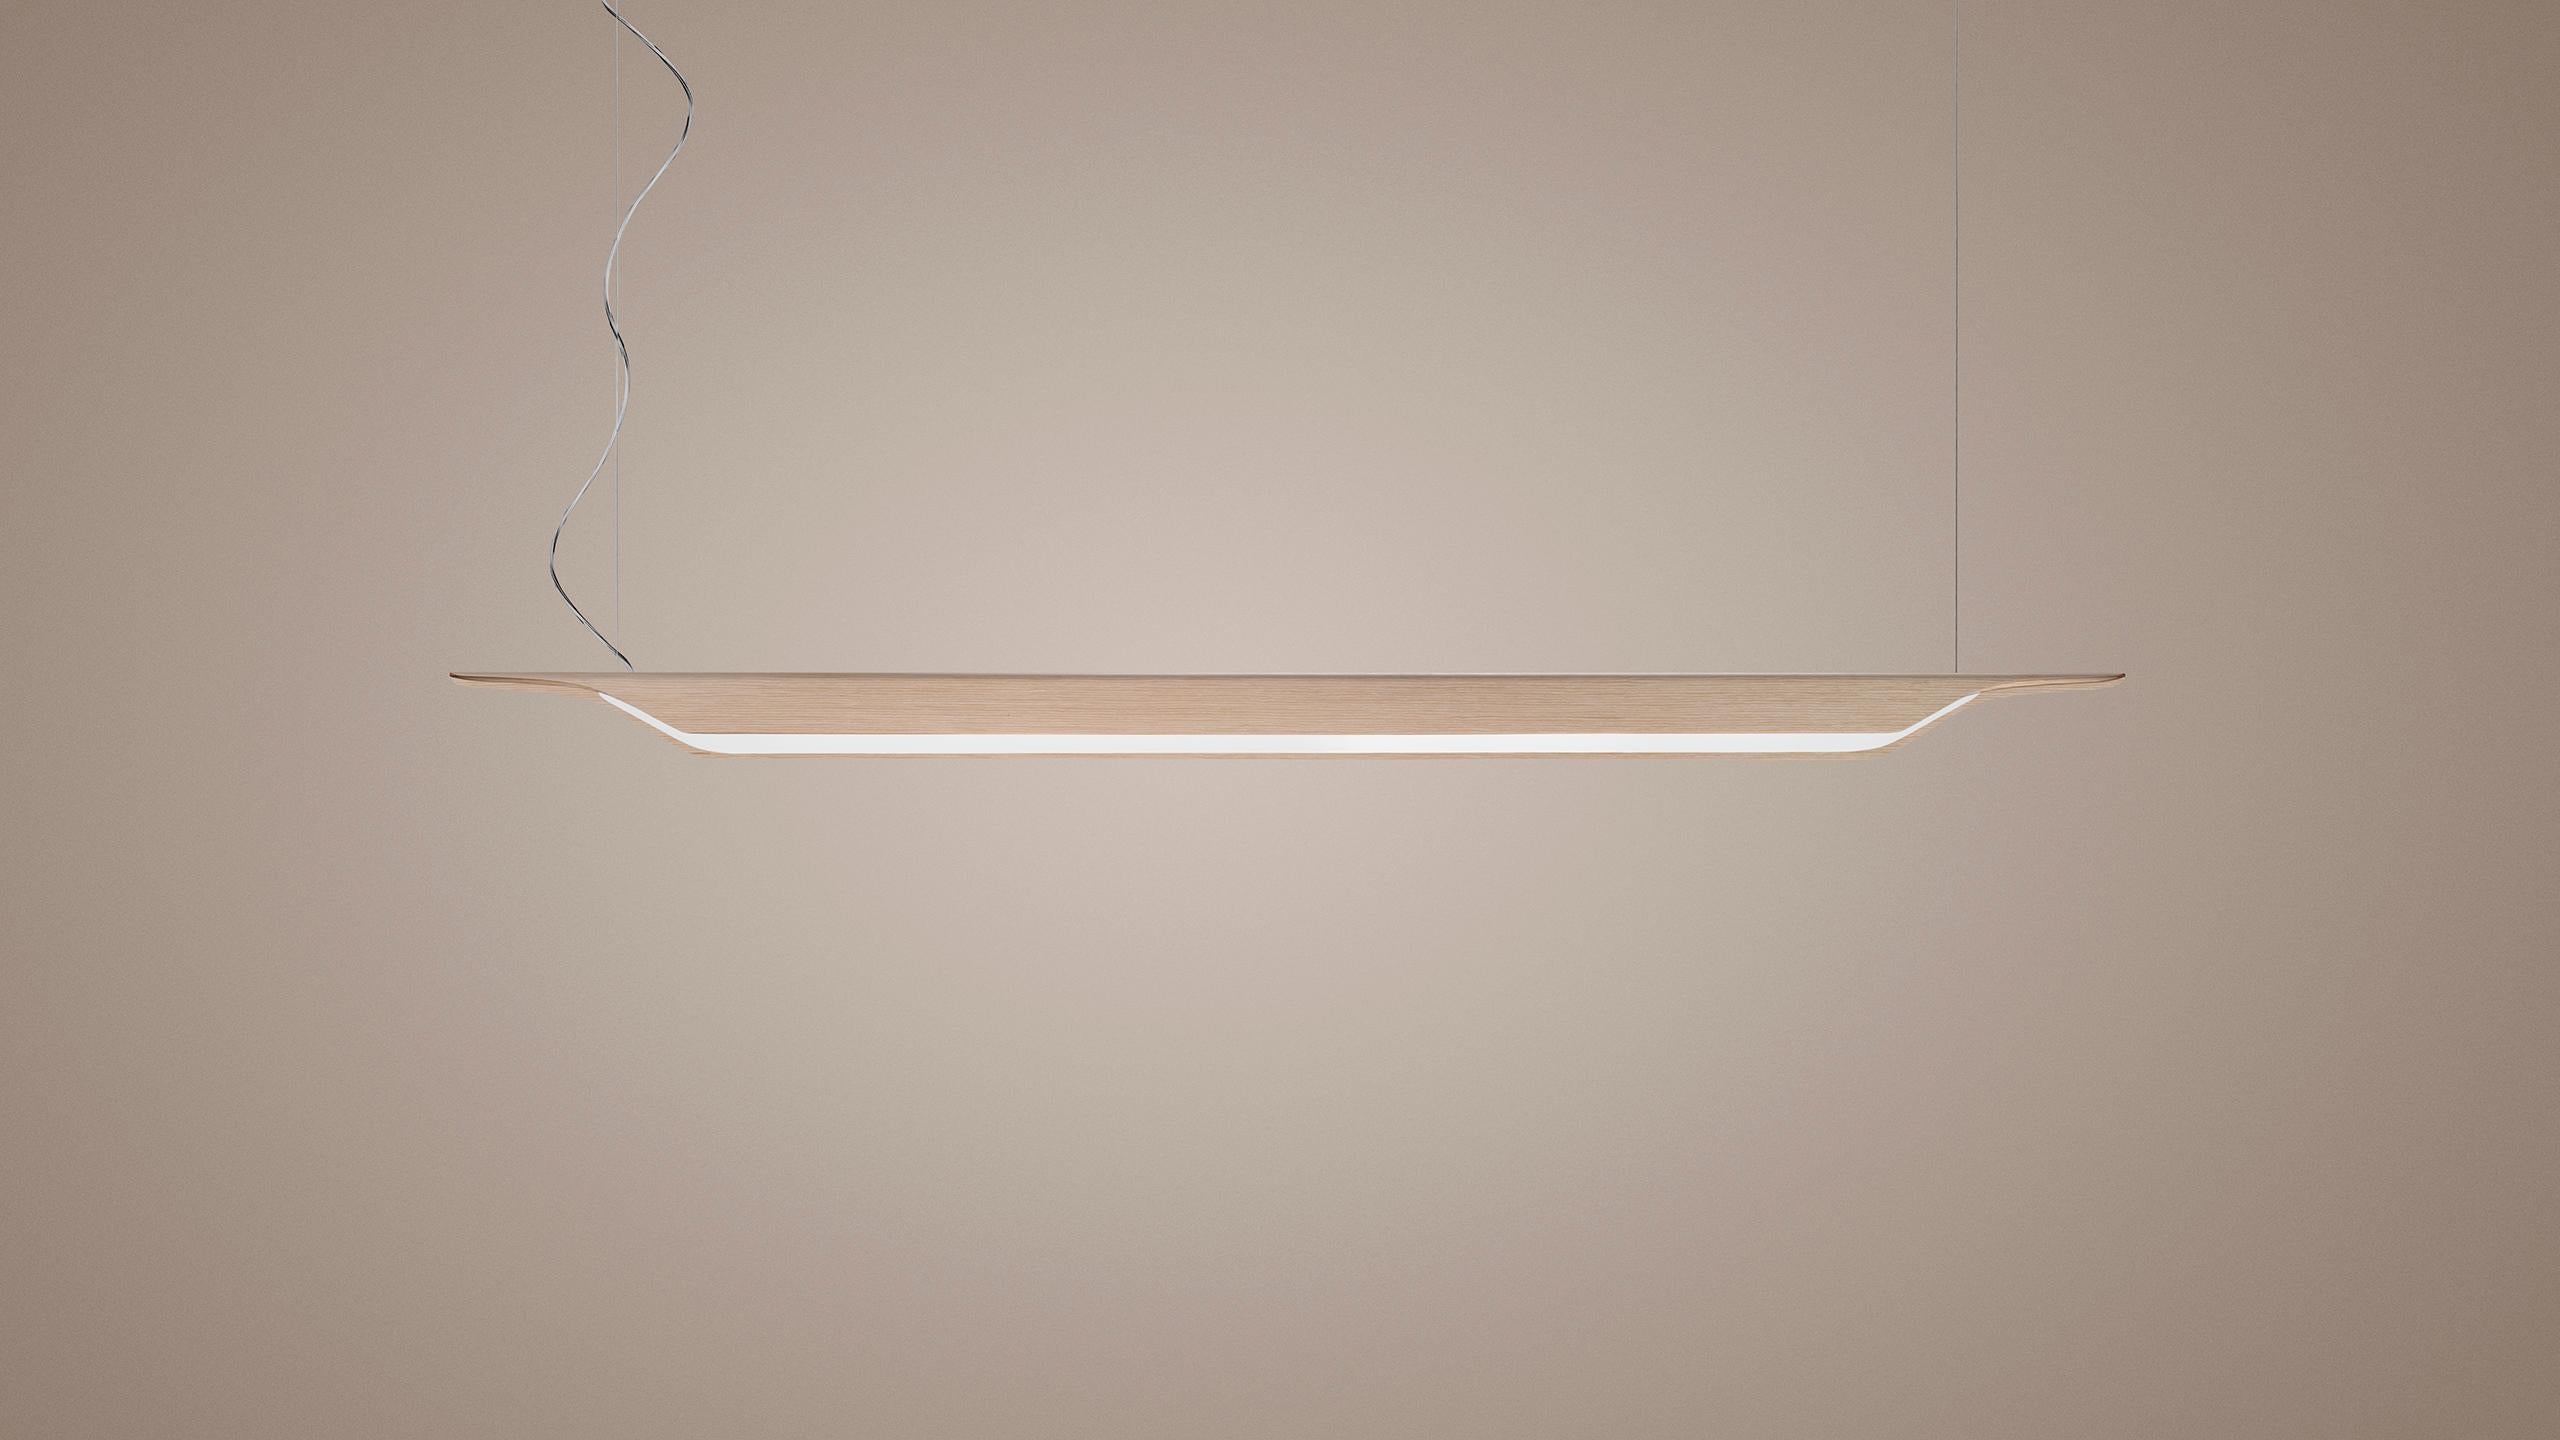 An unprecedented wooden suspension lamp, mid-way between Nordic culture and Mediterranean creativity, Troag is a light and linear sign in space.

Materials:
Curved ash plywood and PMMA

Light source:
Troag media LED
50W 3000 K
6800 lm CRI>90